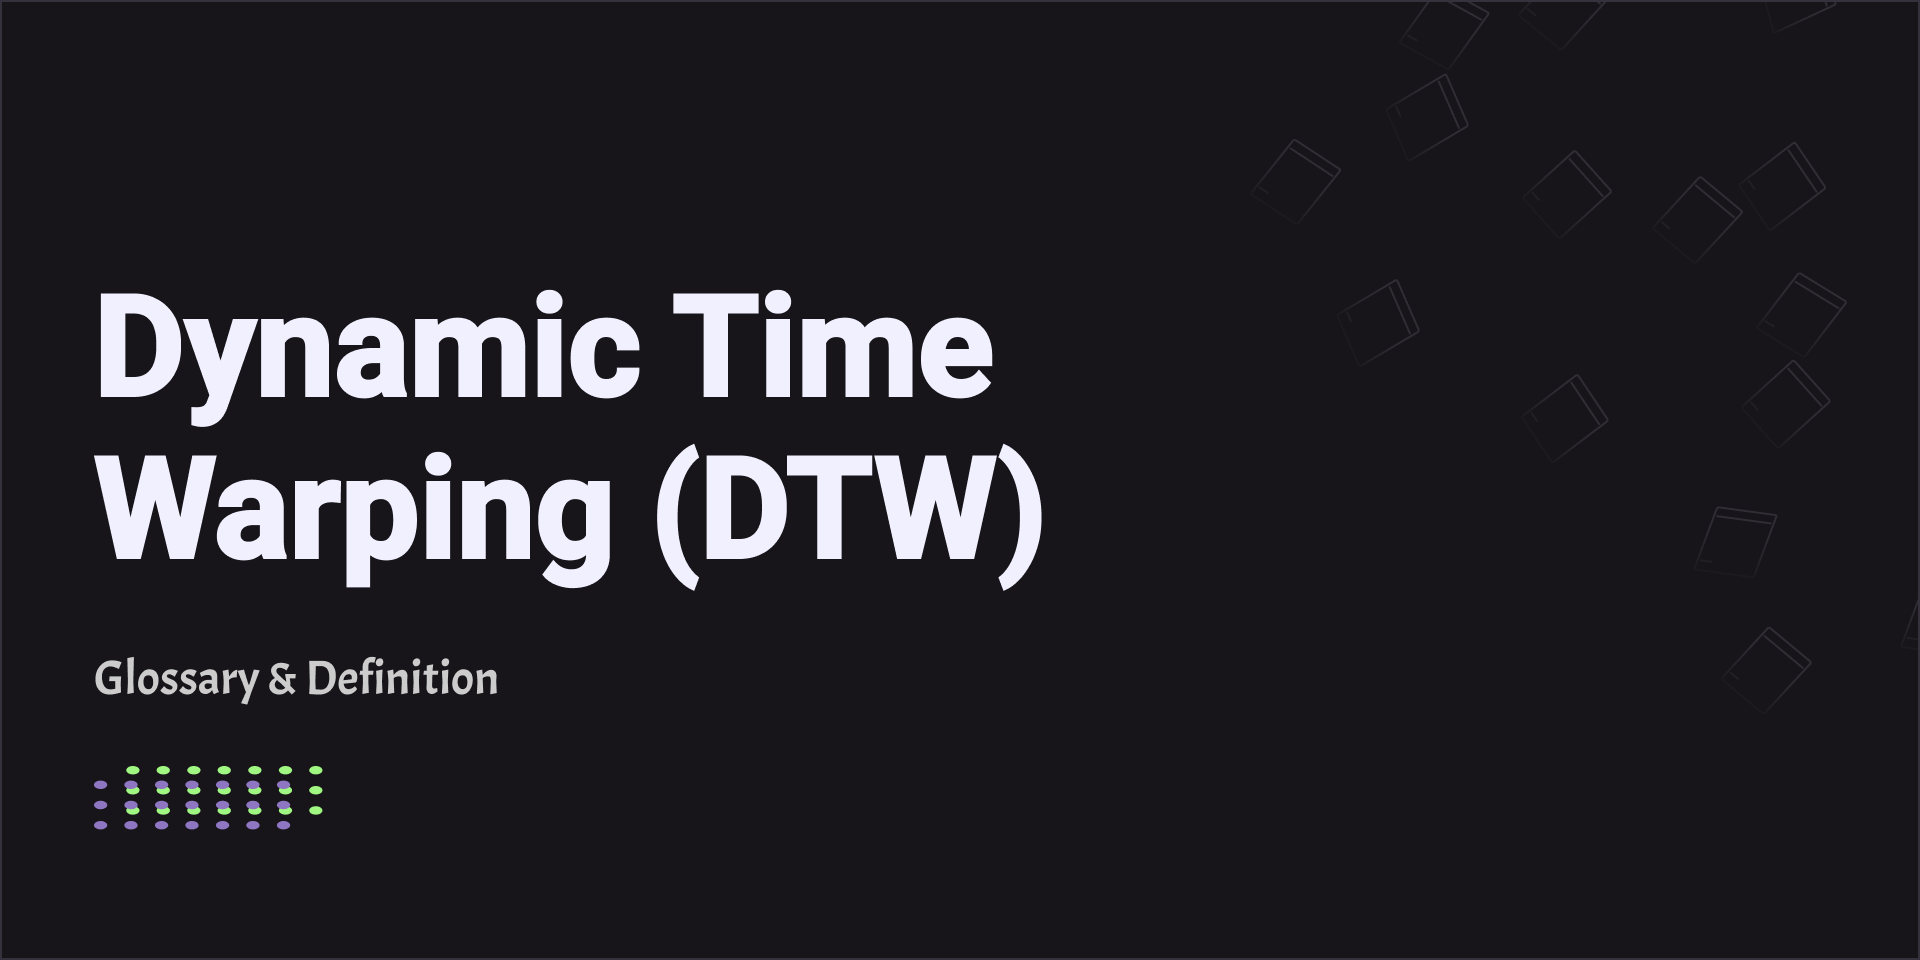 Dynamic Time Warping (DTW)